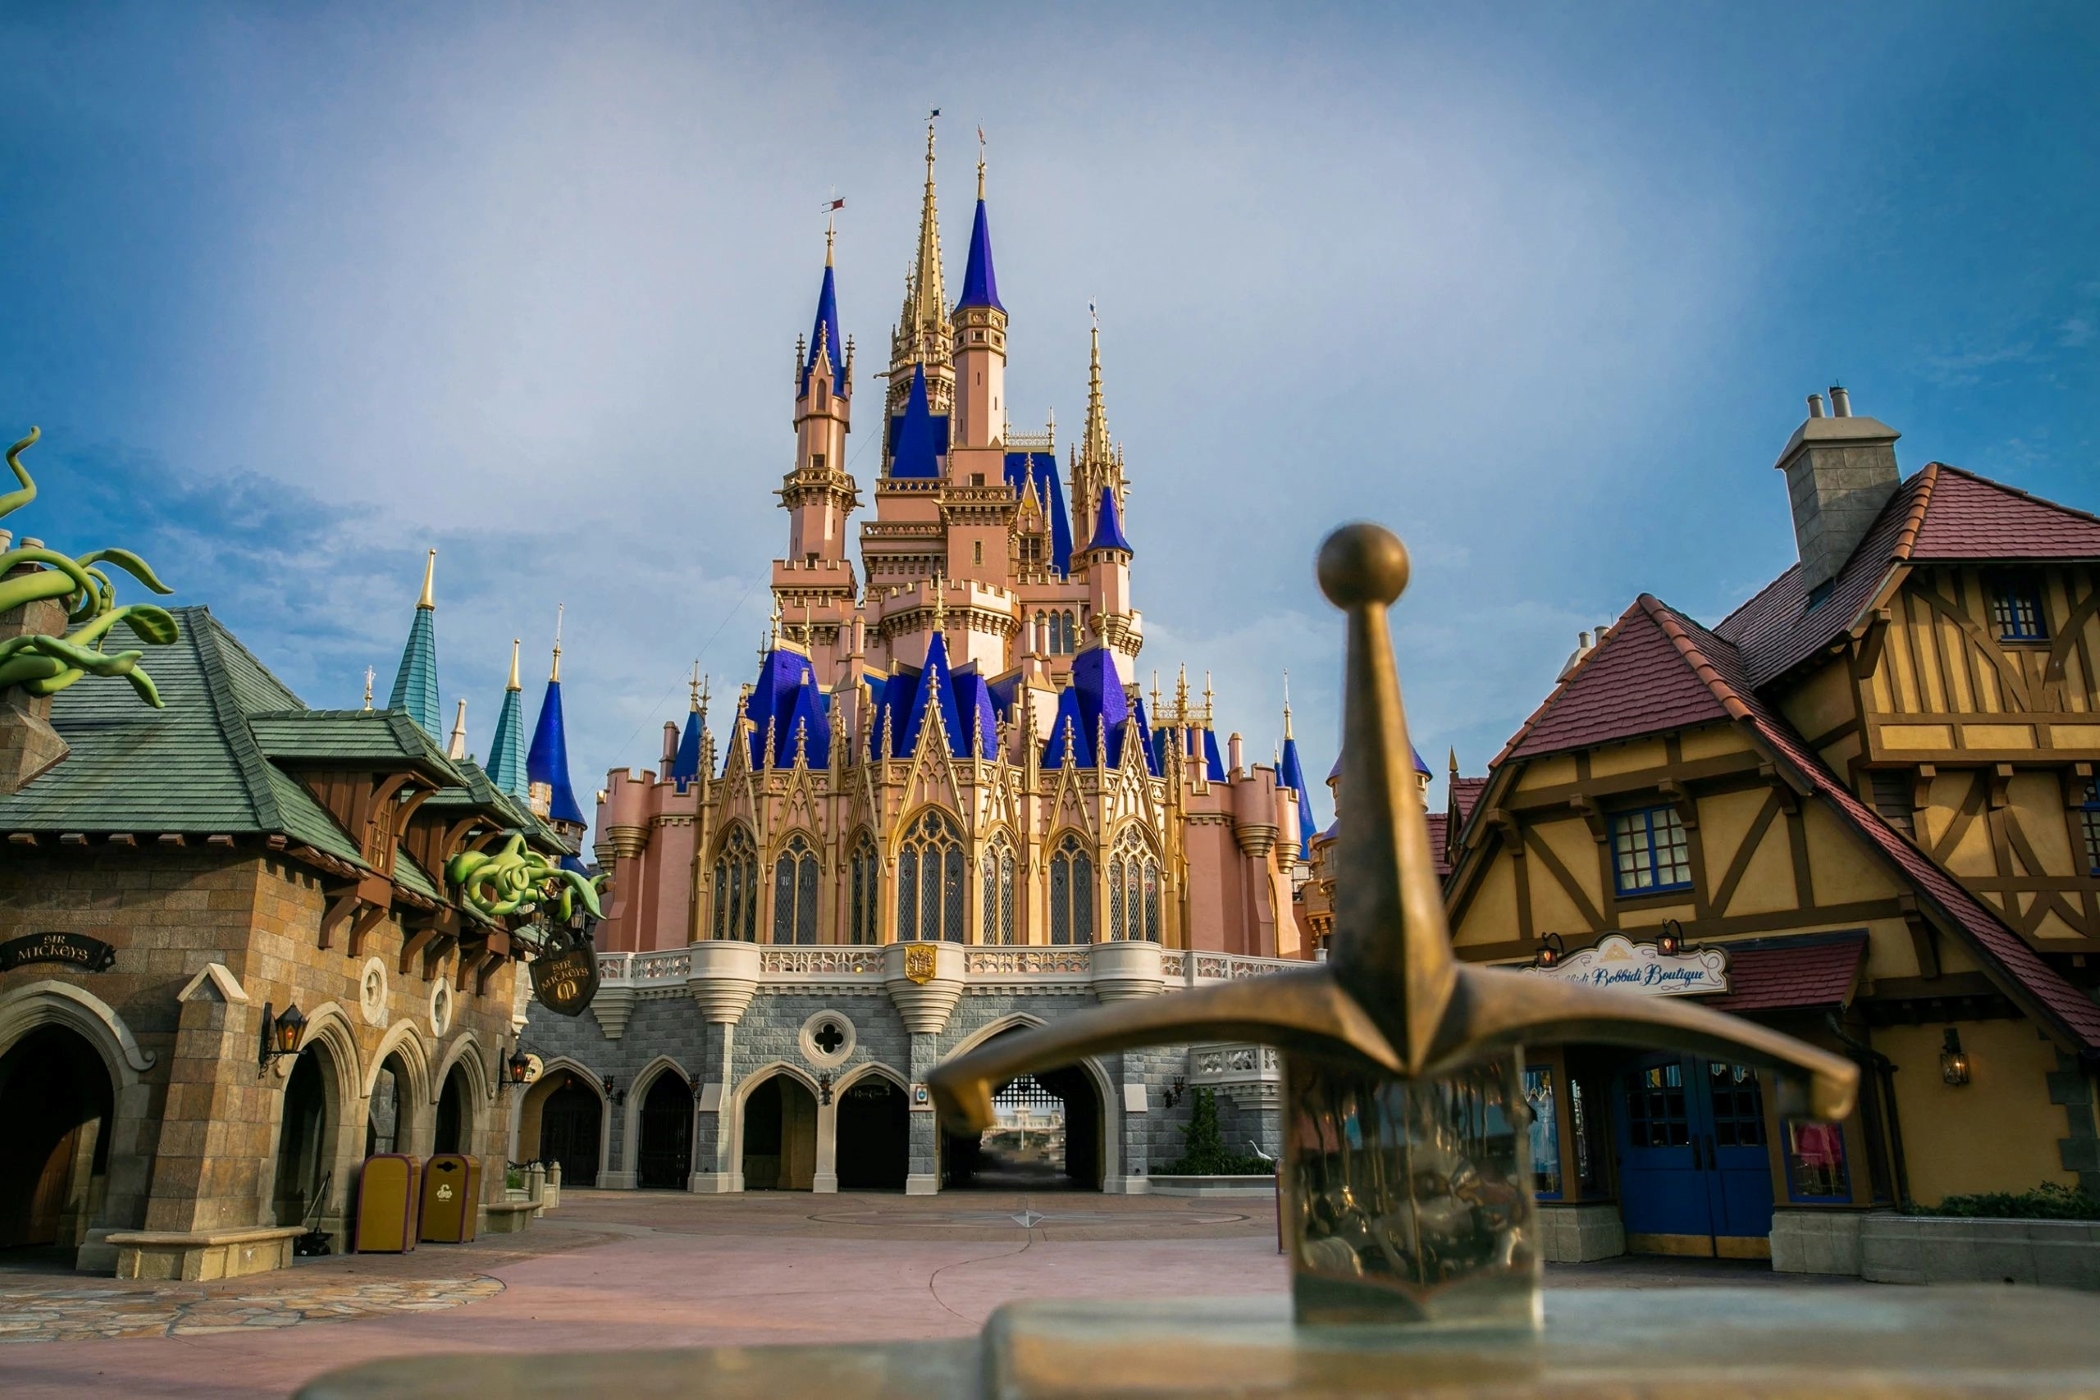 Disney World in Florida helped fuel a significant boost in domestic theme park revenue for the company in its latest quarter. (Getty Images)